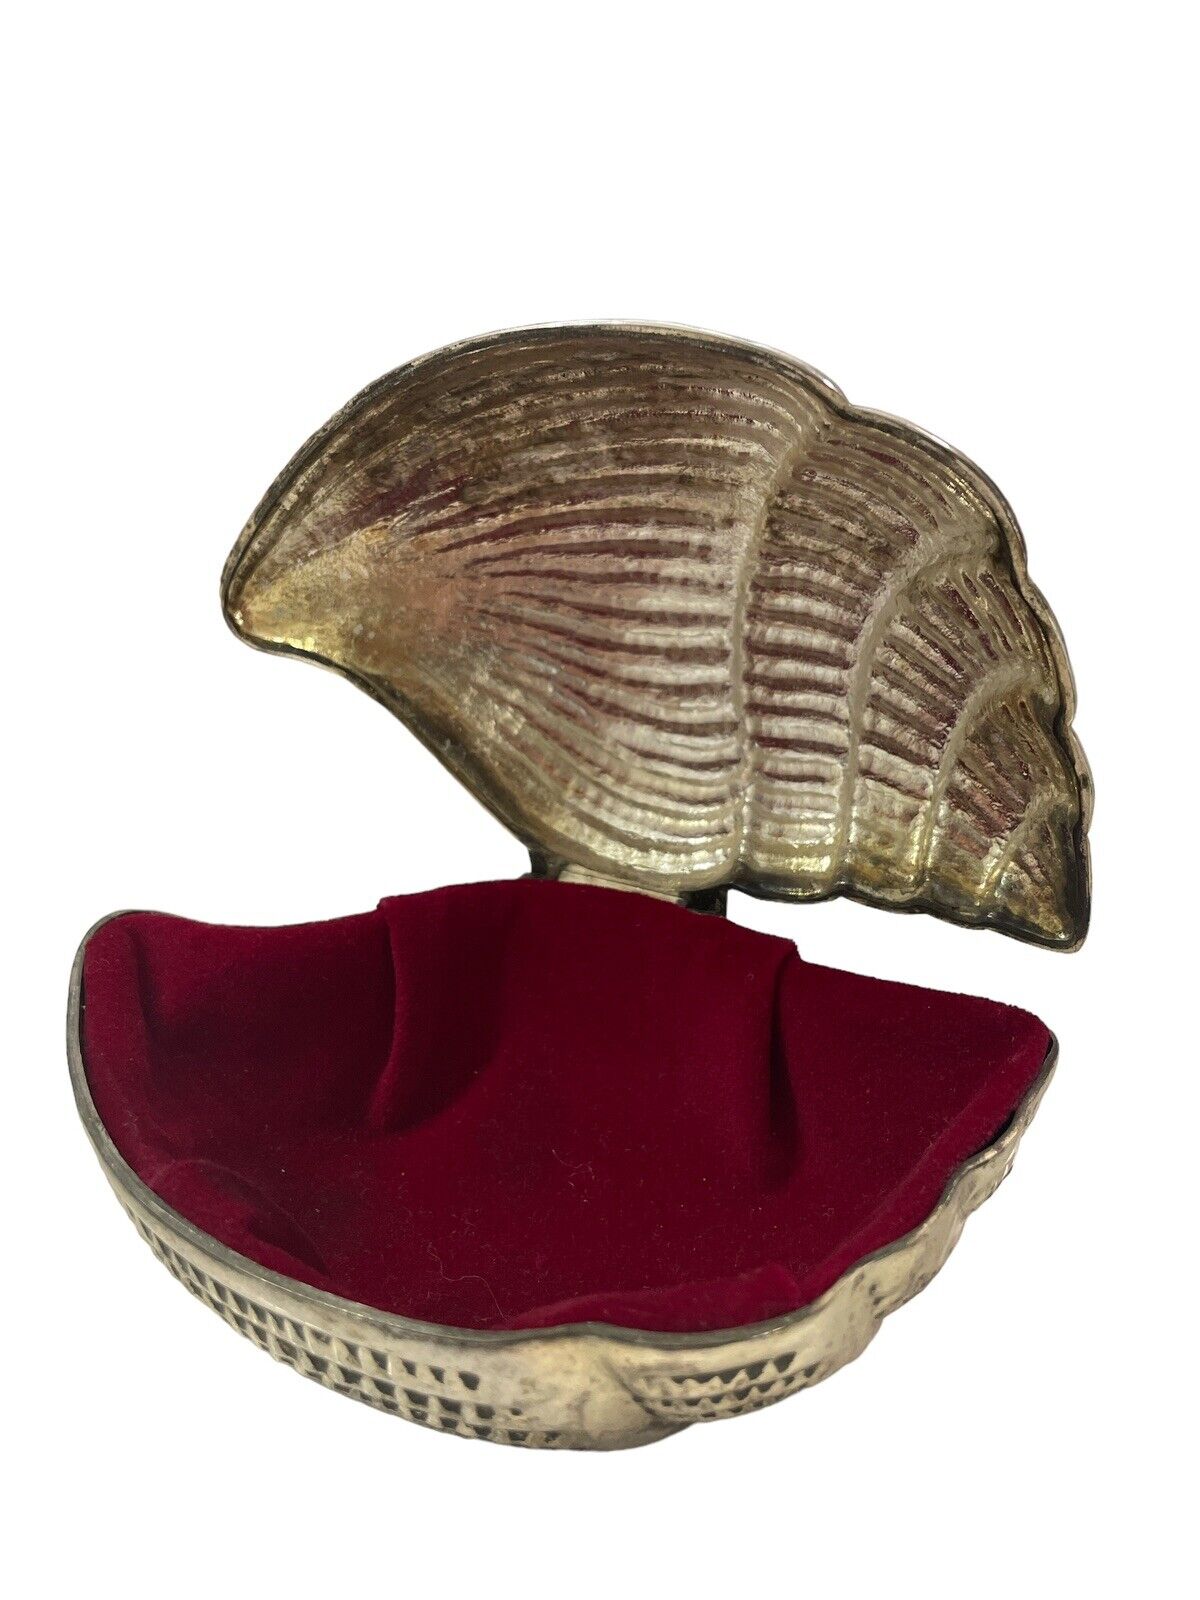 Vintage Conch Shell Silver Plate Trinket Jewelry Box Red Velvet lining Nautical